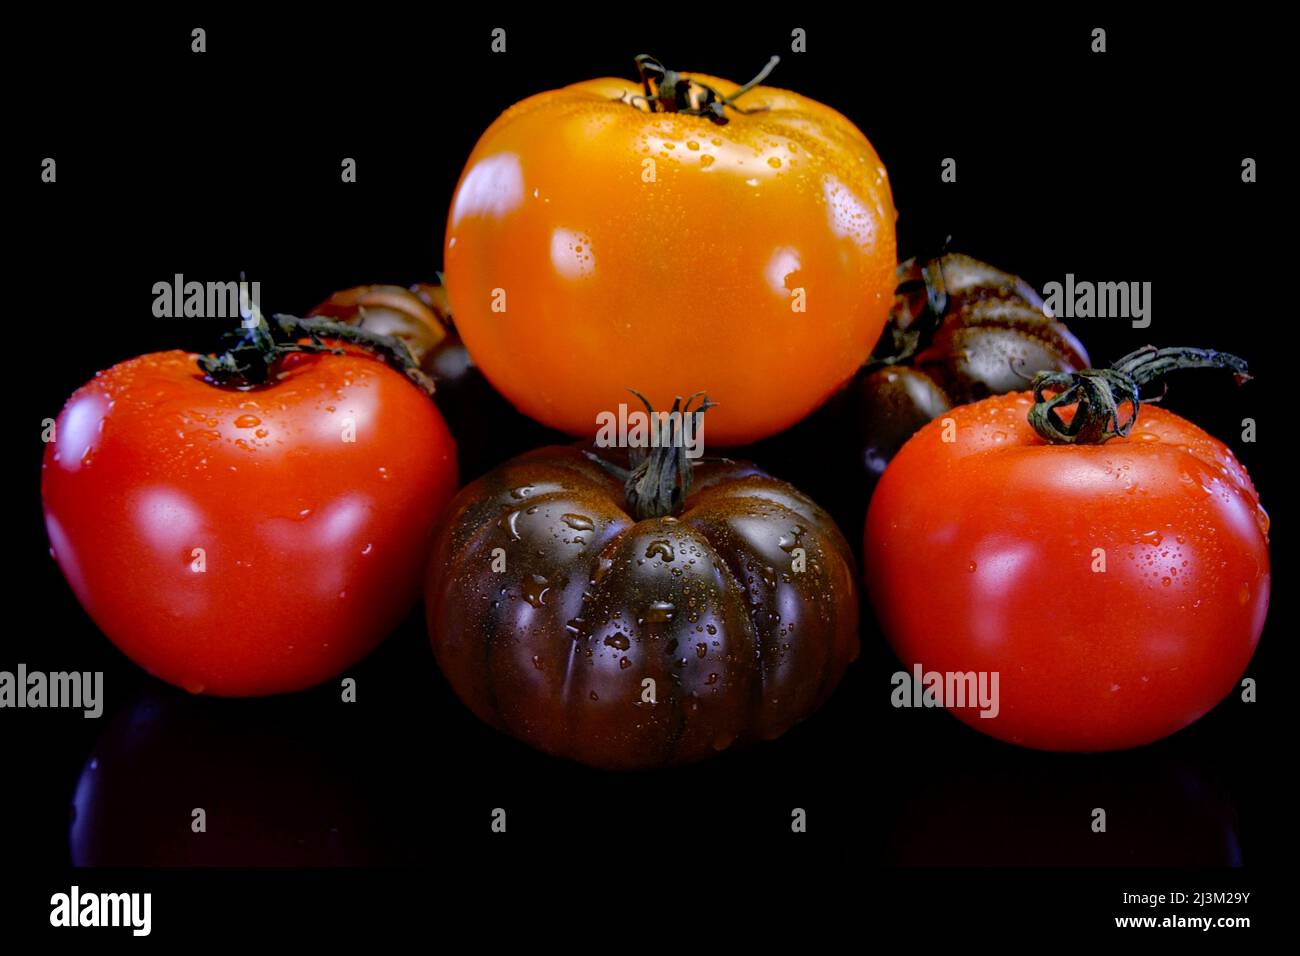 Different kinds of tomatoes on a black background. Fresh and firm tomato. Restaurant, groceries store or agriculture promo. Stock Photo